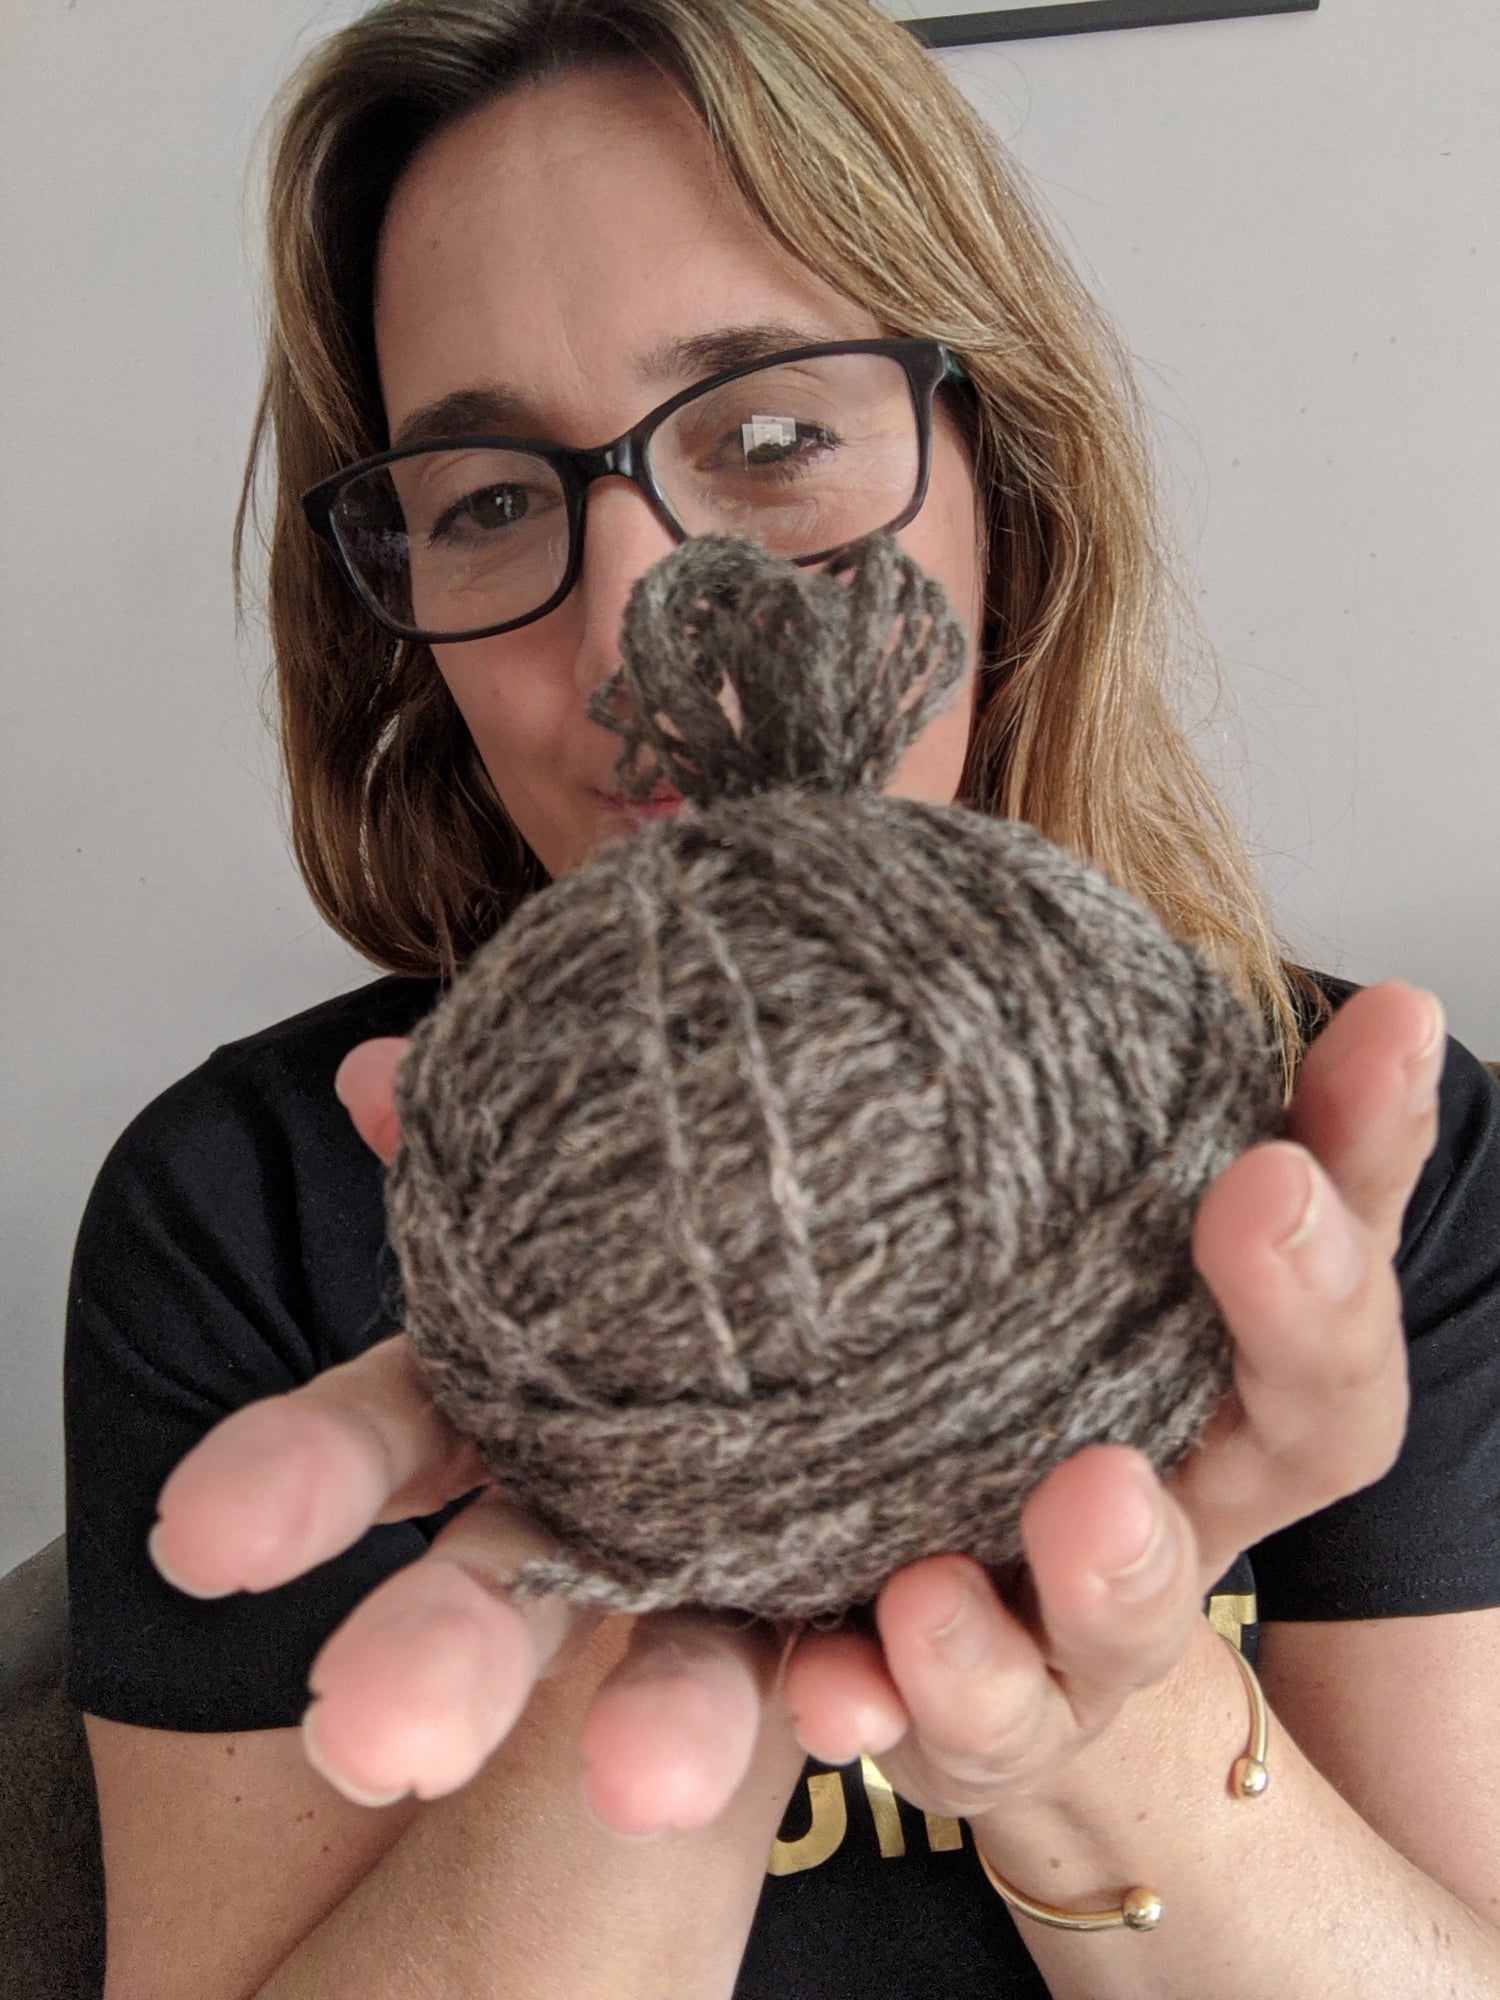 CROCHET BASICS: What to do with a Skein of yarn